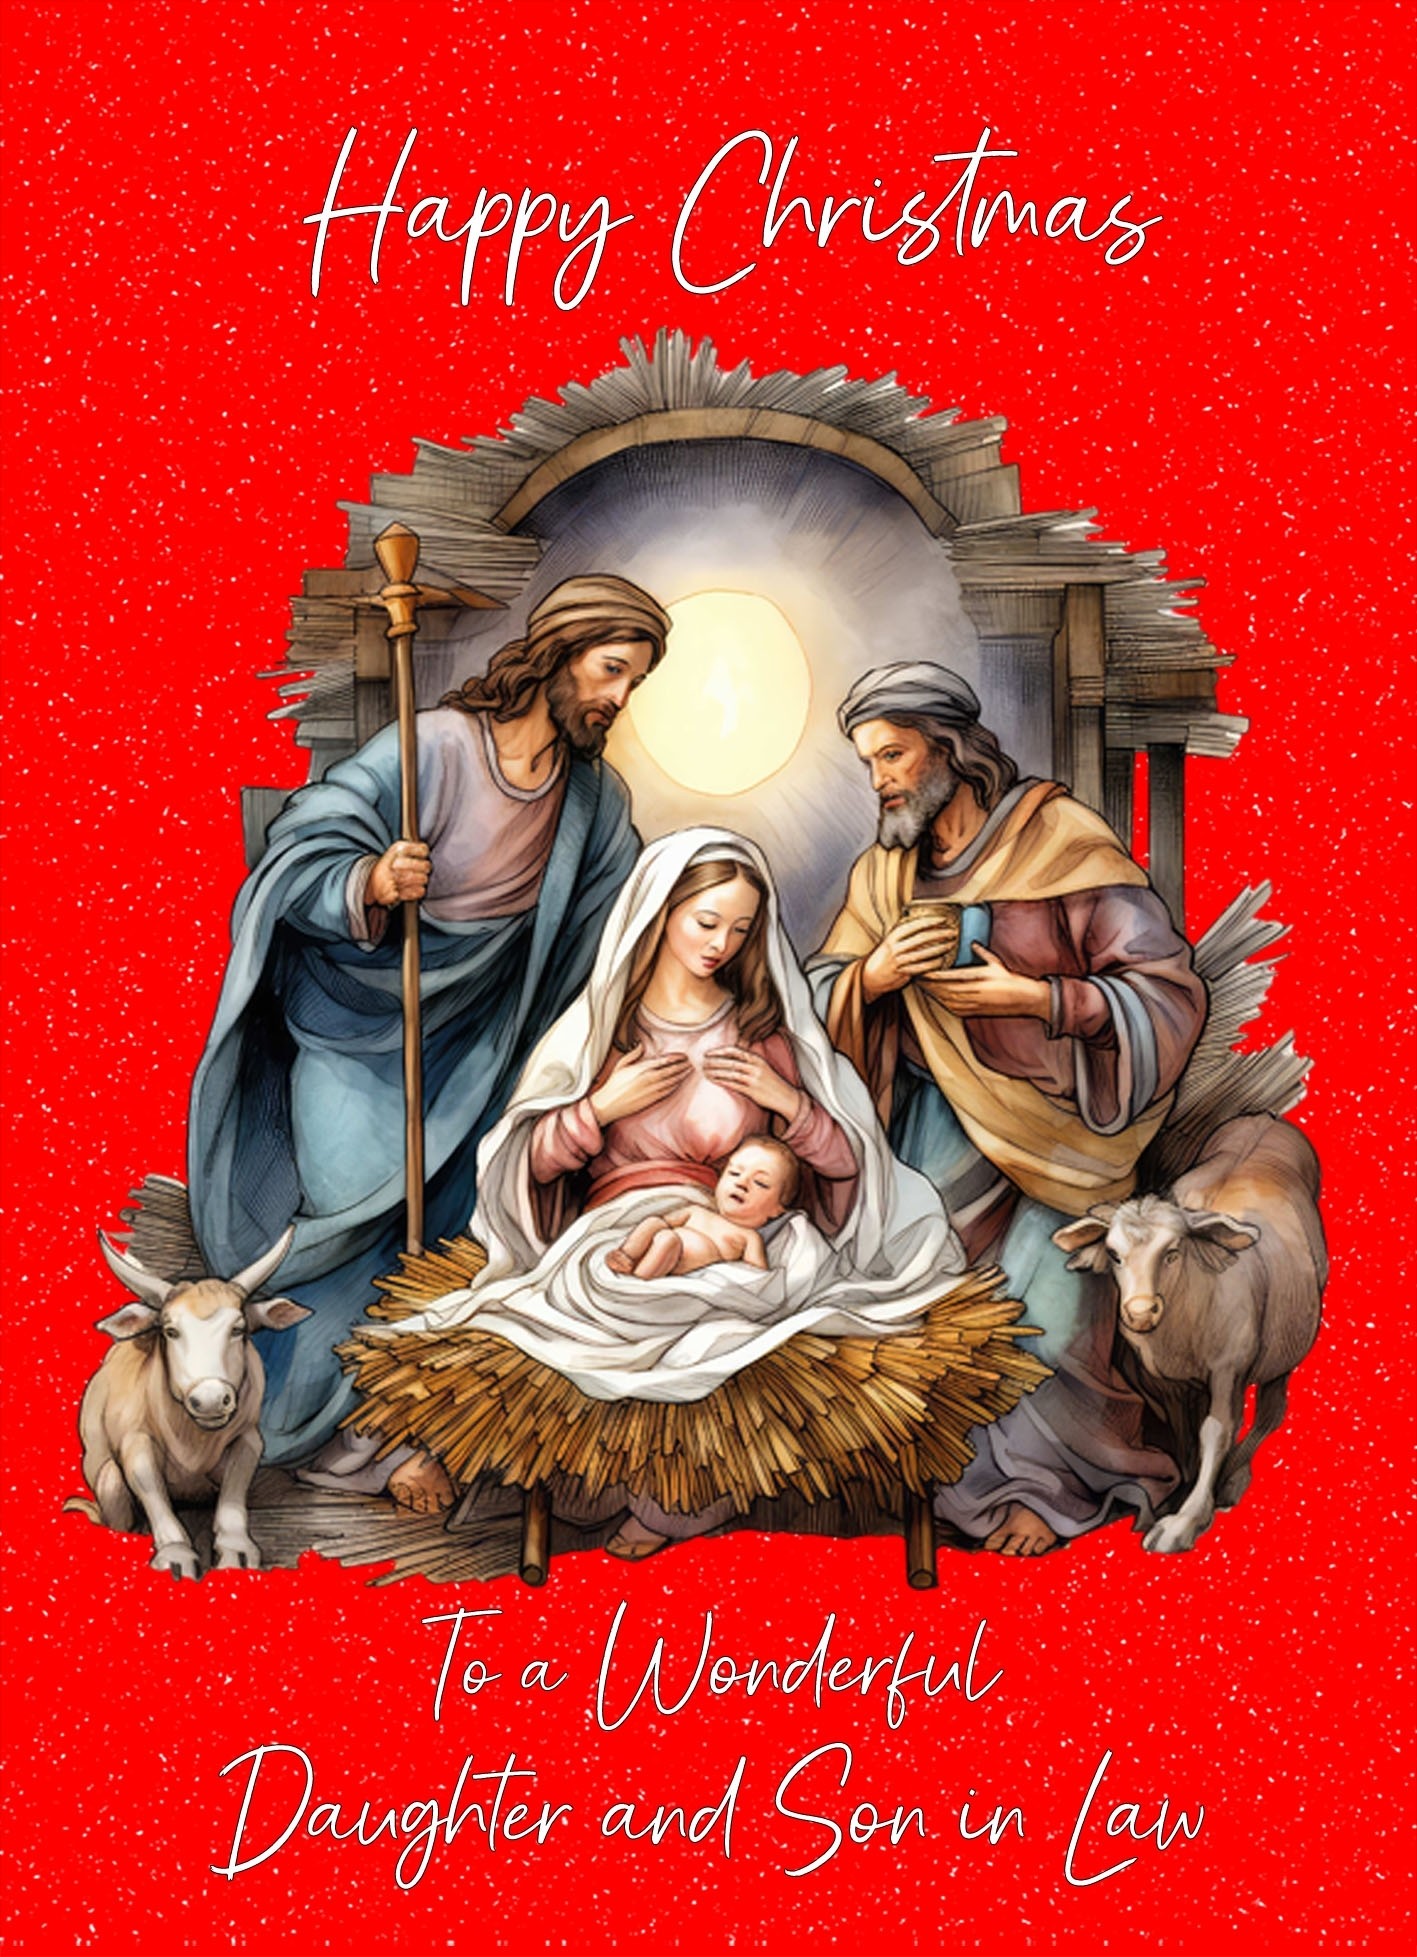 Christmas Card For Daughter and Son in Law (Nativity Scene)